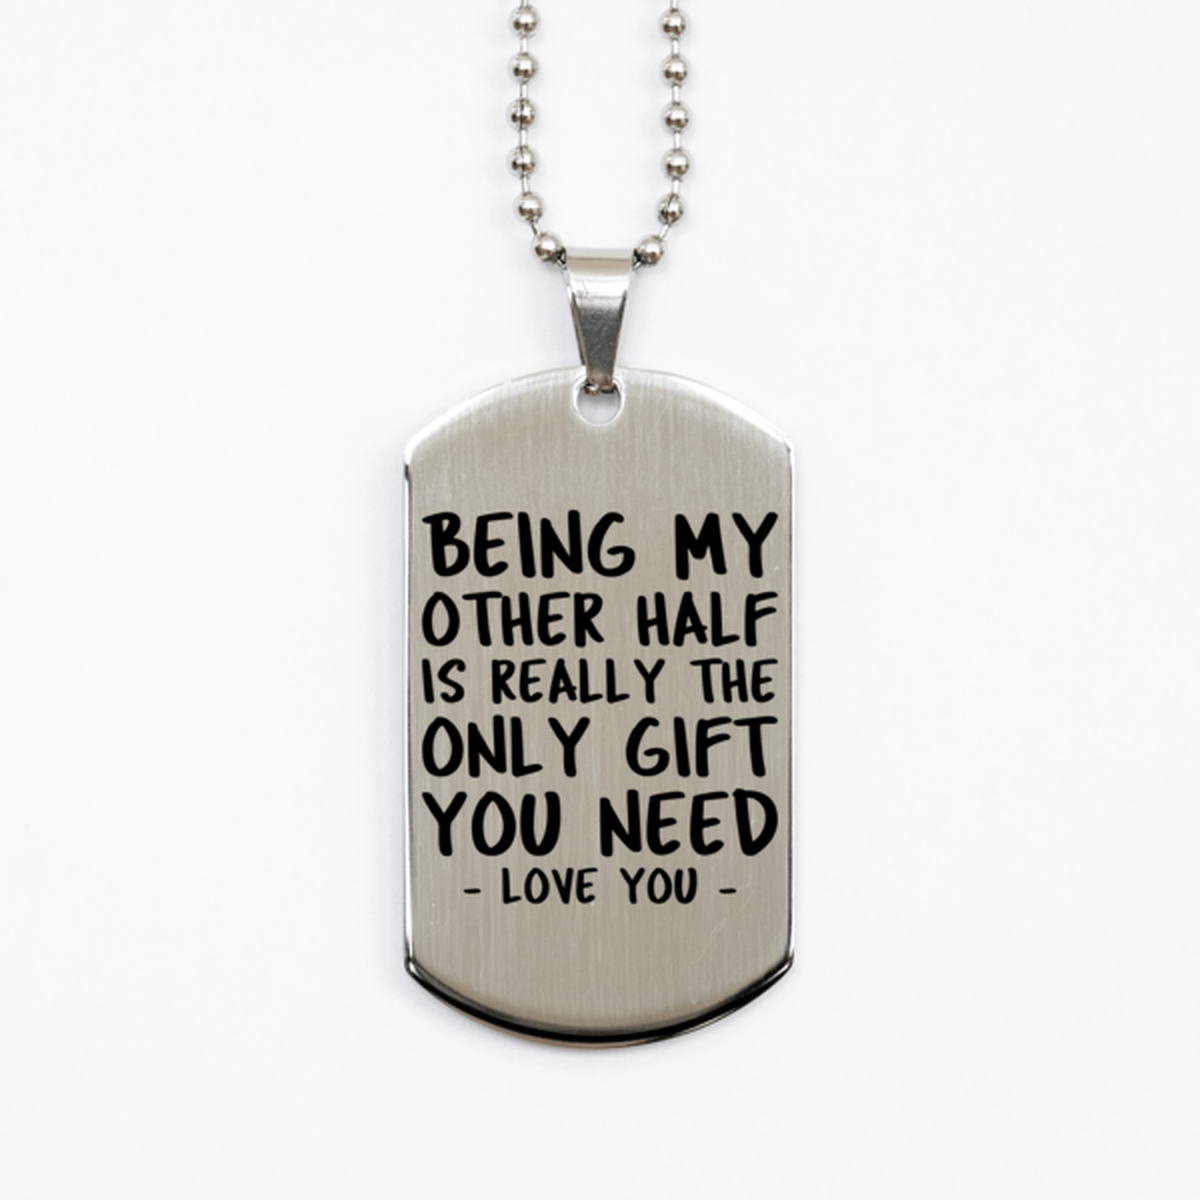 Funny Other Half Silver Dog Tag Necklace, Being My Other Half Is Really the Only Gift You Need, Best Birthday Gifts for Other Half